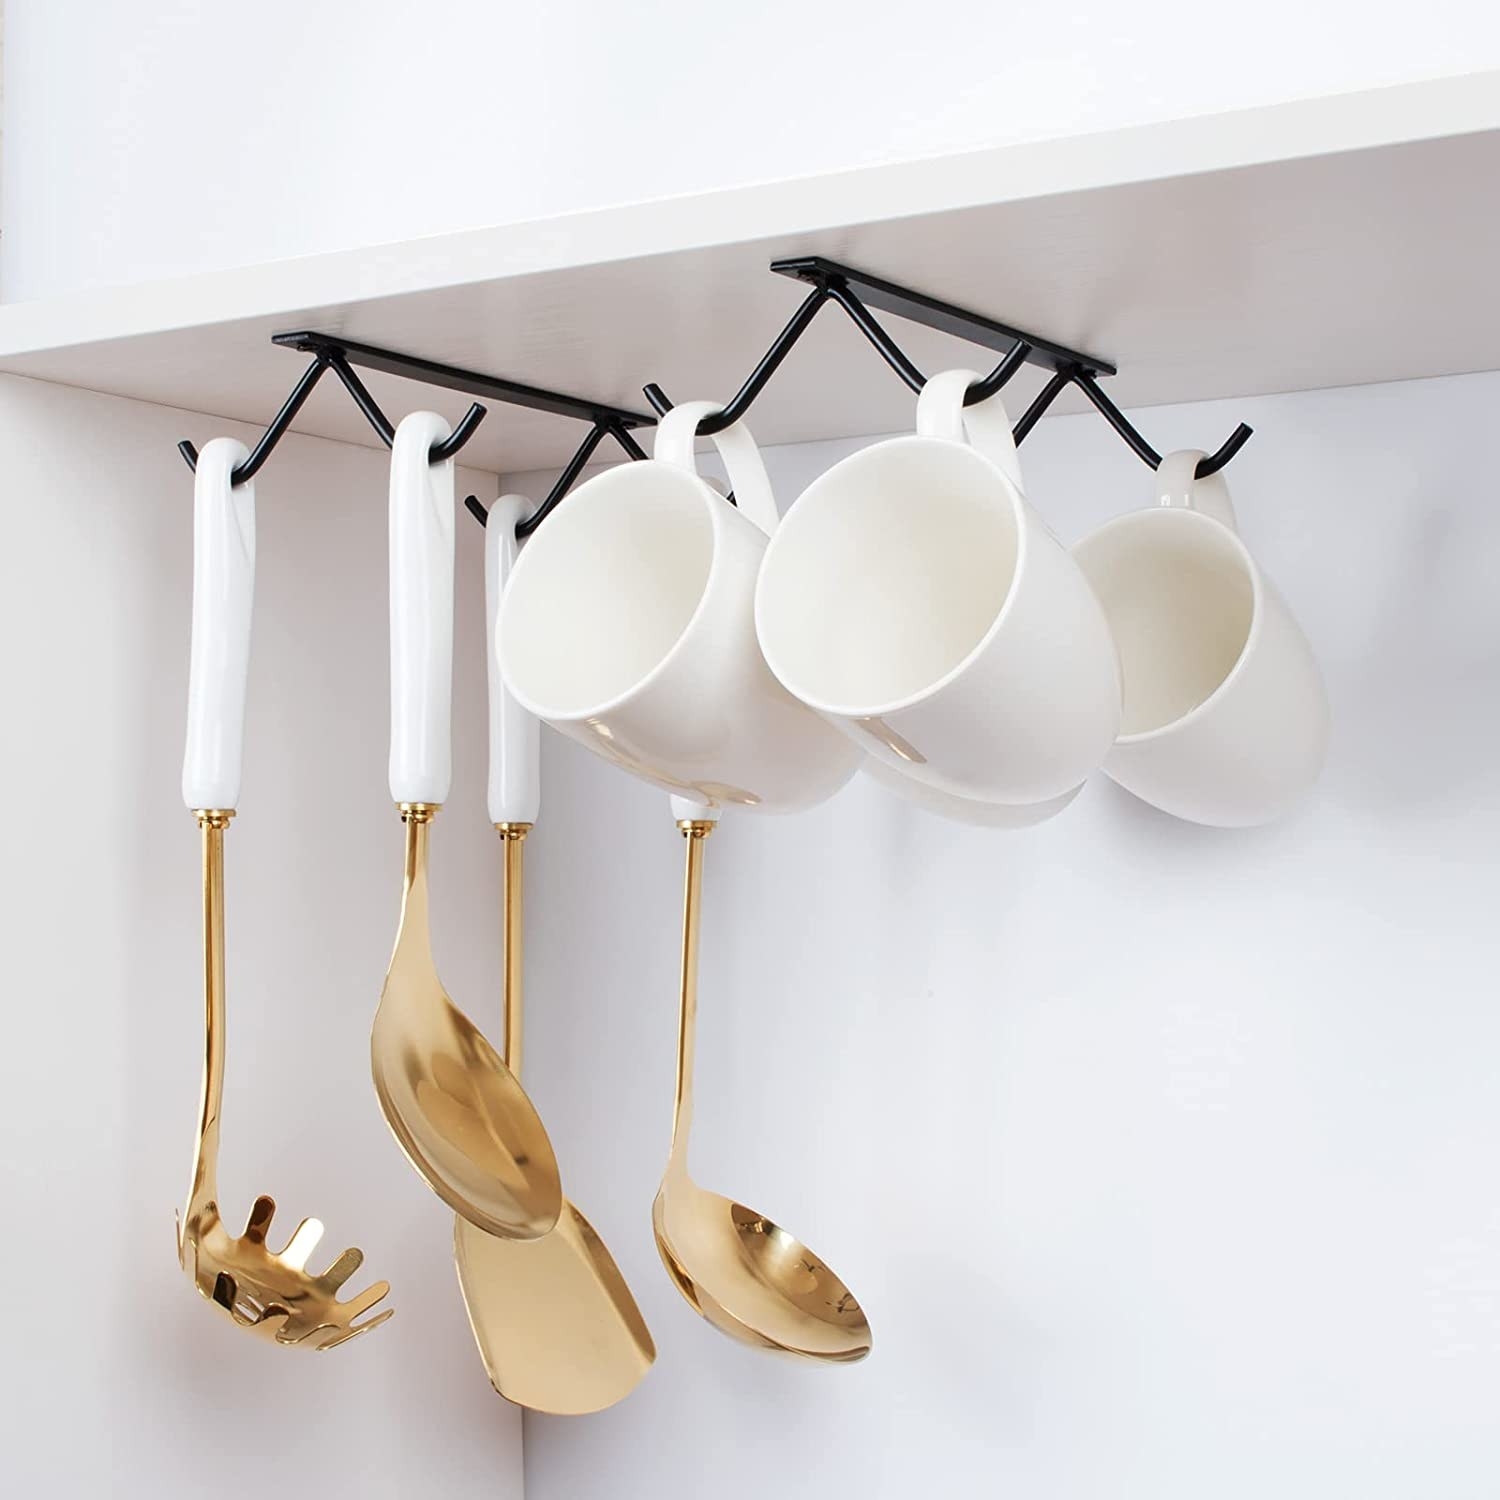 ladles and mugs hanging from the hooks which are mounted under a cabinet shelf